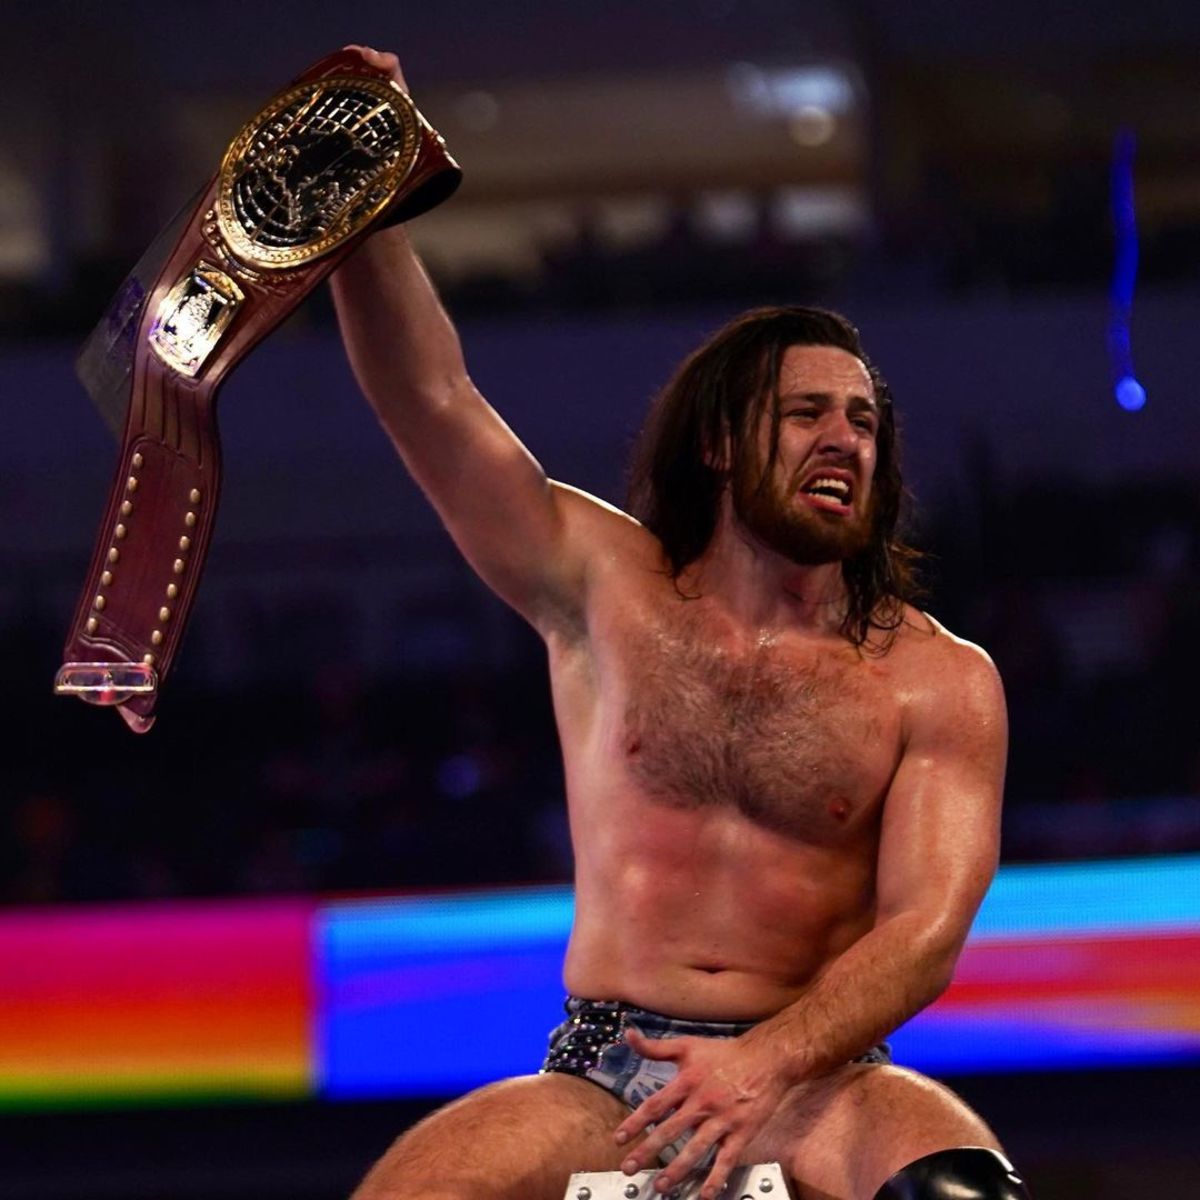 Cameron Grimes wins North American title at NXT Stand & Deliver - WON/F4W - WWE news, Pro Wrestling News, WWE Results, AEW News, AEW results